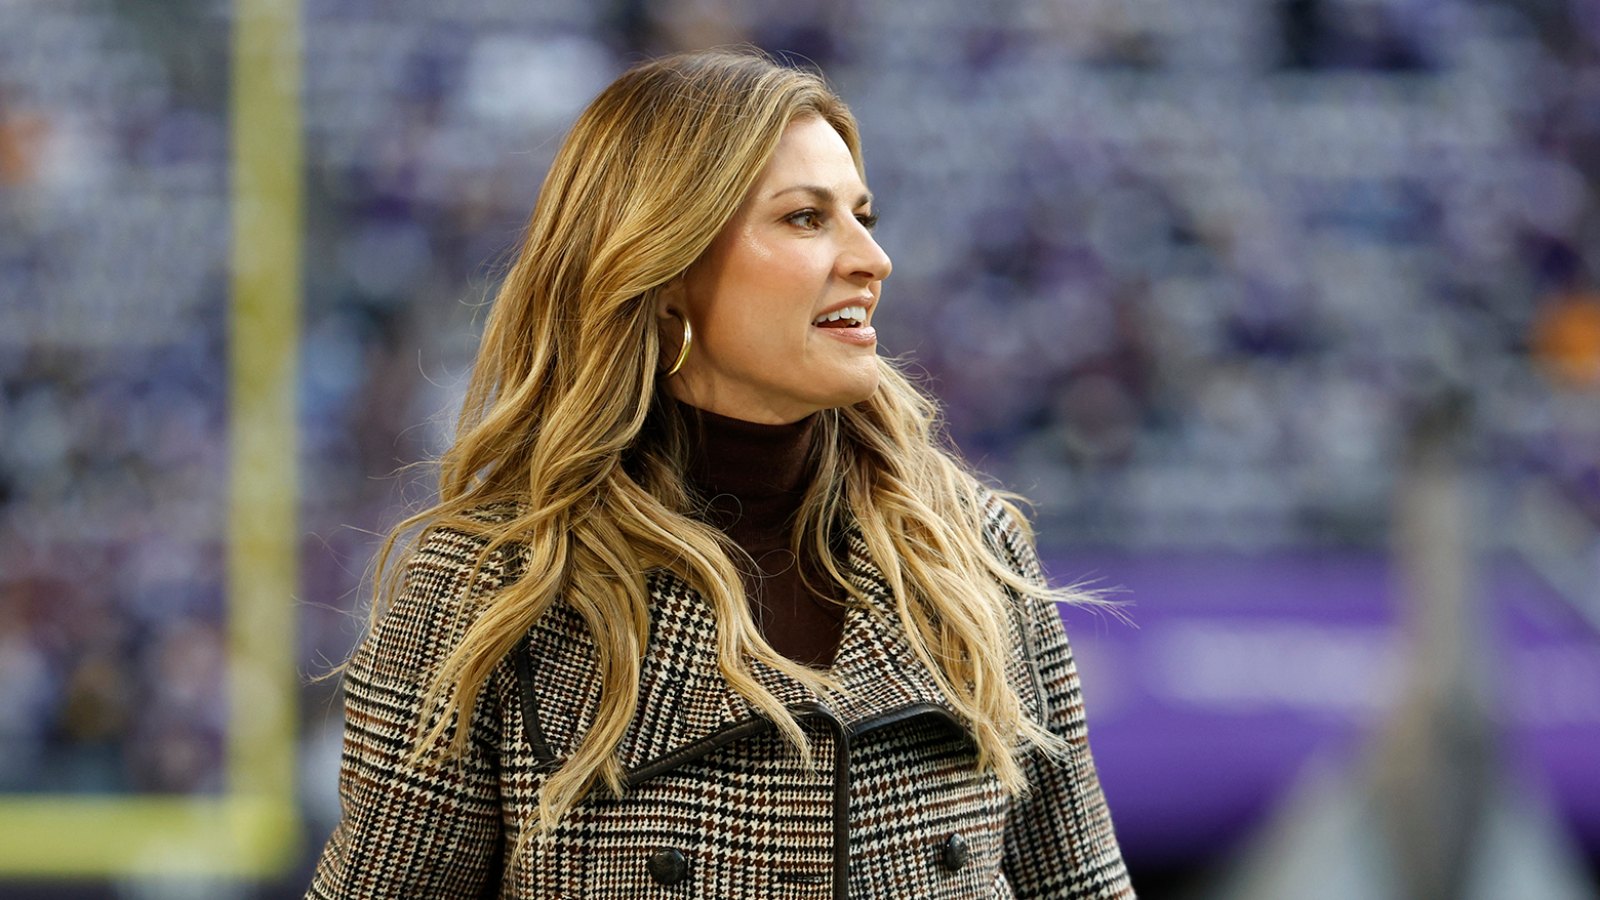 Erin Andrews prior to the NFC Wild Card playoff game between the New York Giants and the Minnesota Vikings at U.S. Bank Stadium on January 15, 2023.